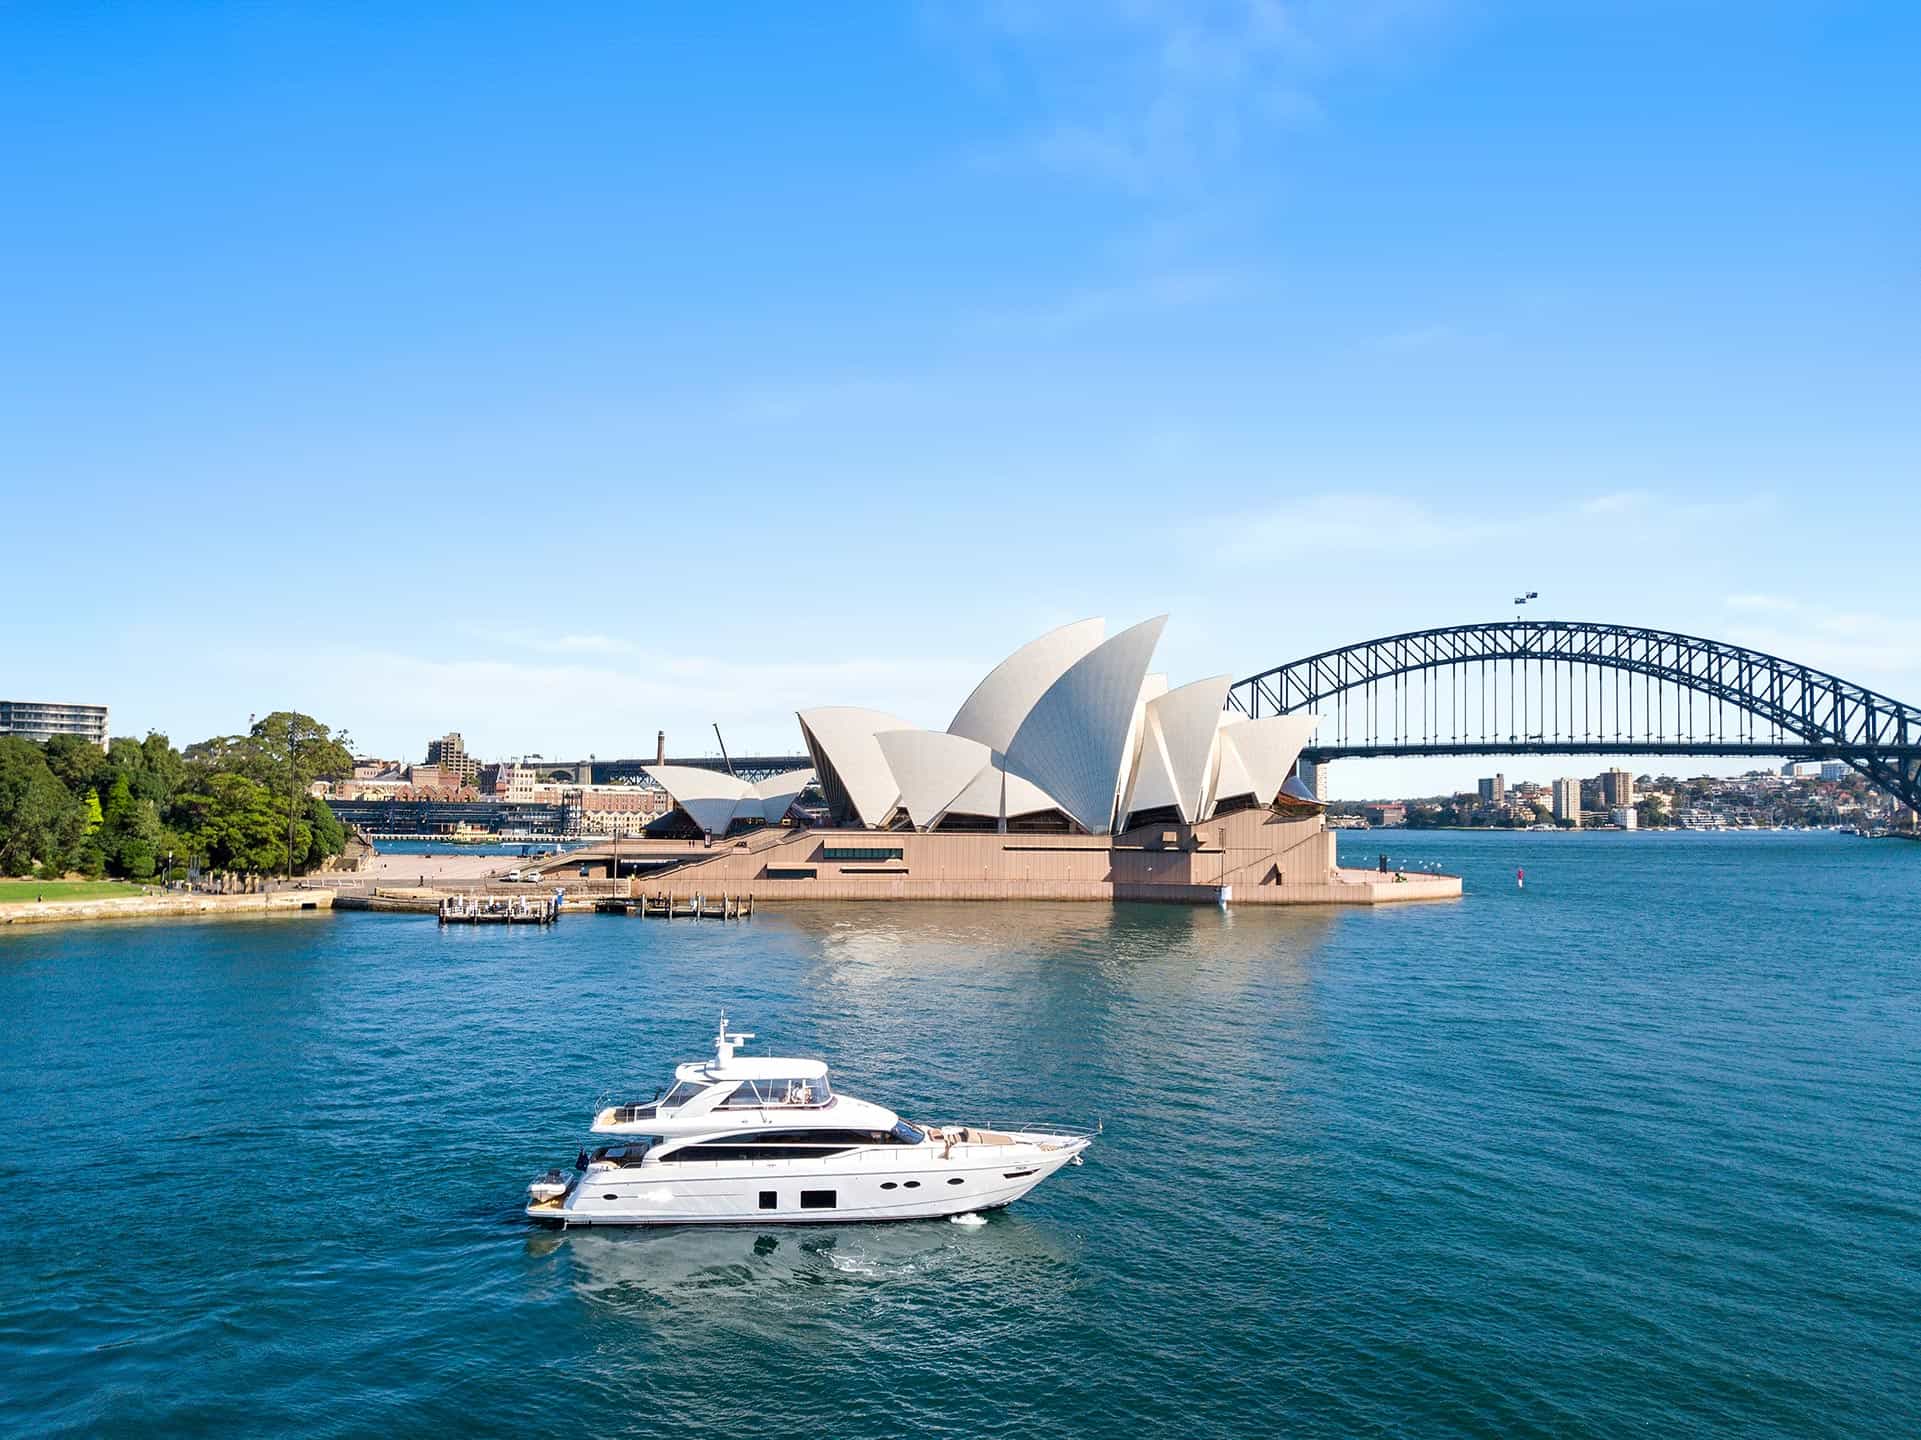 Motor yacht infront of the Sydney Opera House and harbour bridge